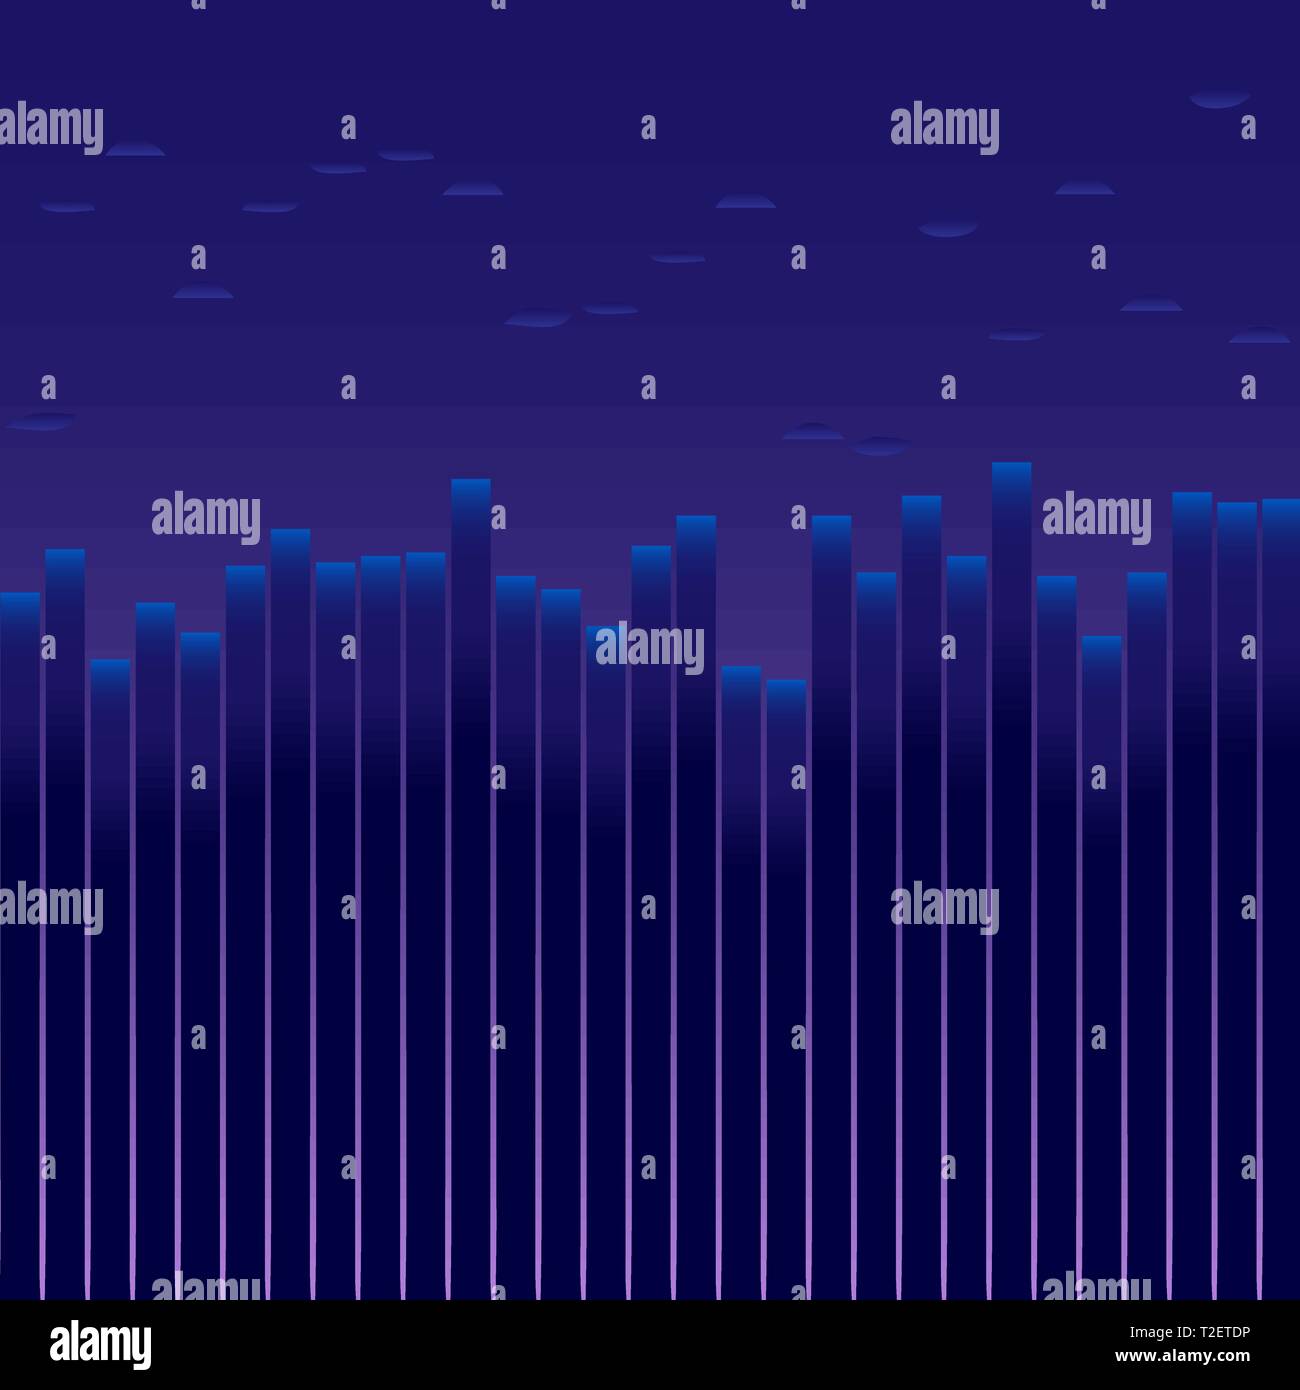 The city before sunrise. Background for text. It looks like an equalizer, the amplitude of sound, the volume of trading on the exchange. Stock Vector